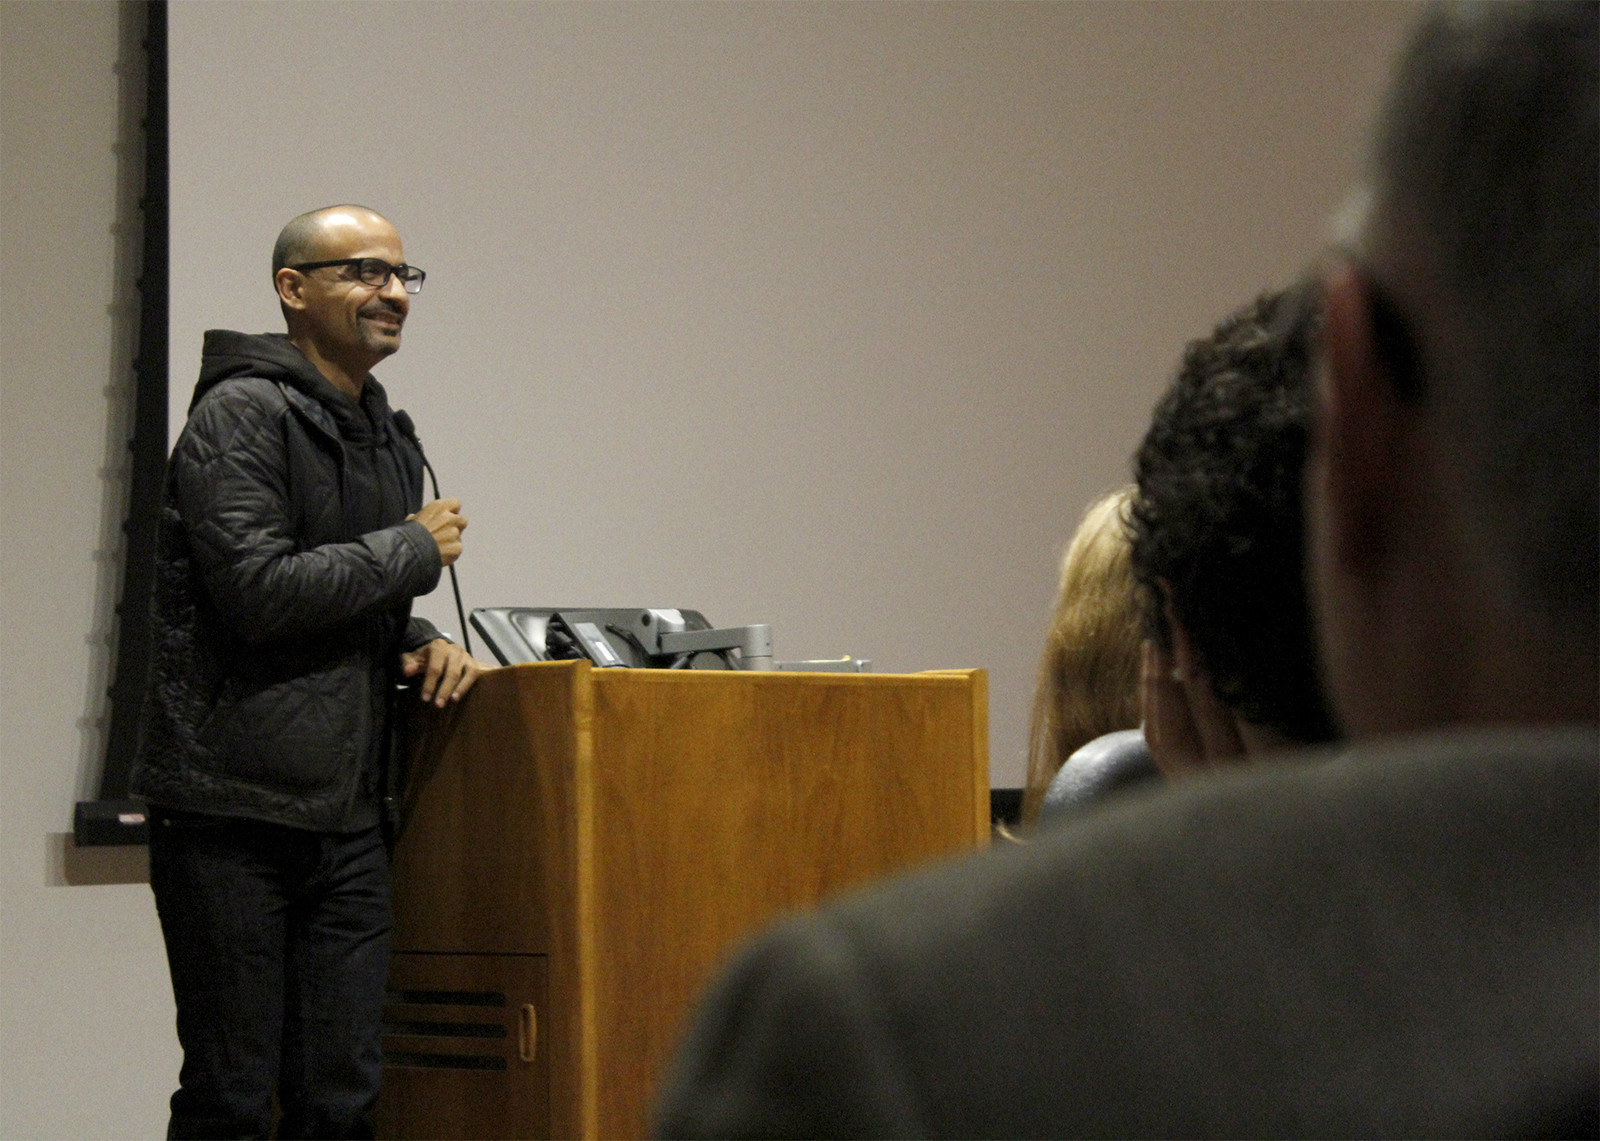 Pulitzer Prize winning author, Junot Diaz, read from his most recent work and answered audience member’s questions during the “Ha Jin visiting Lecturer Series” Monday night. PHOTO BY RACHEL MCLEAN/DAILY FREE PRESS STAFF